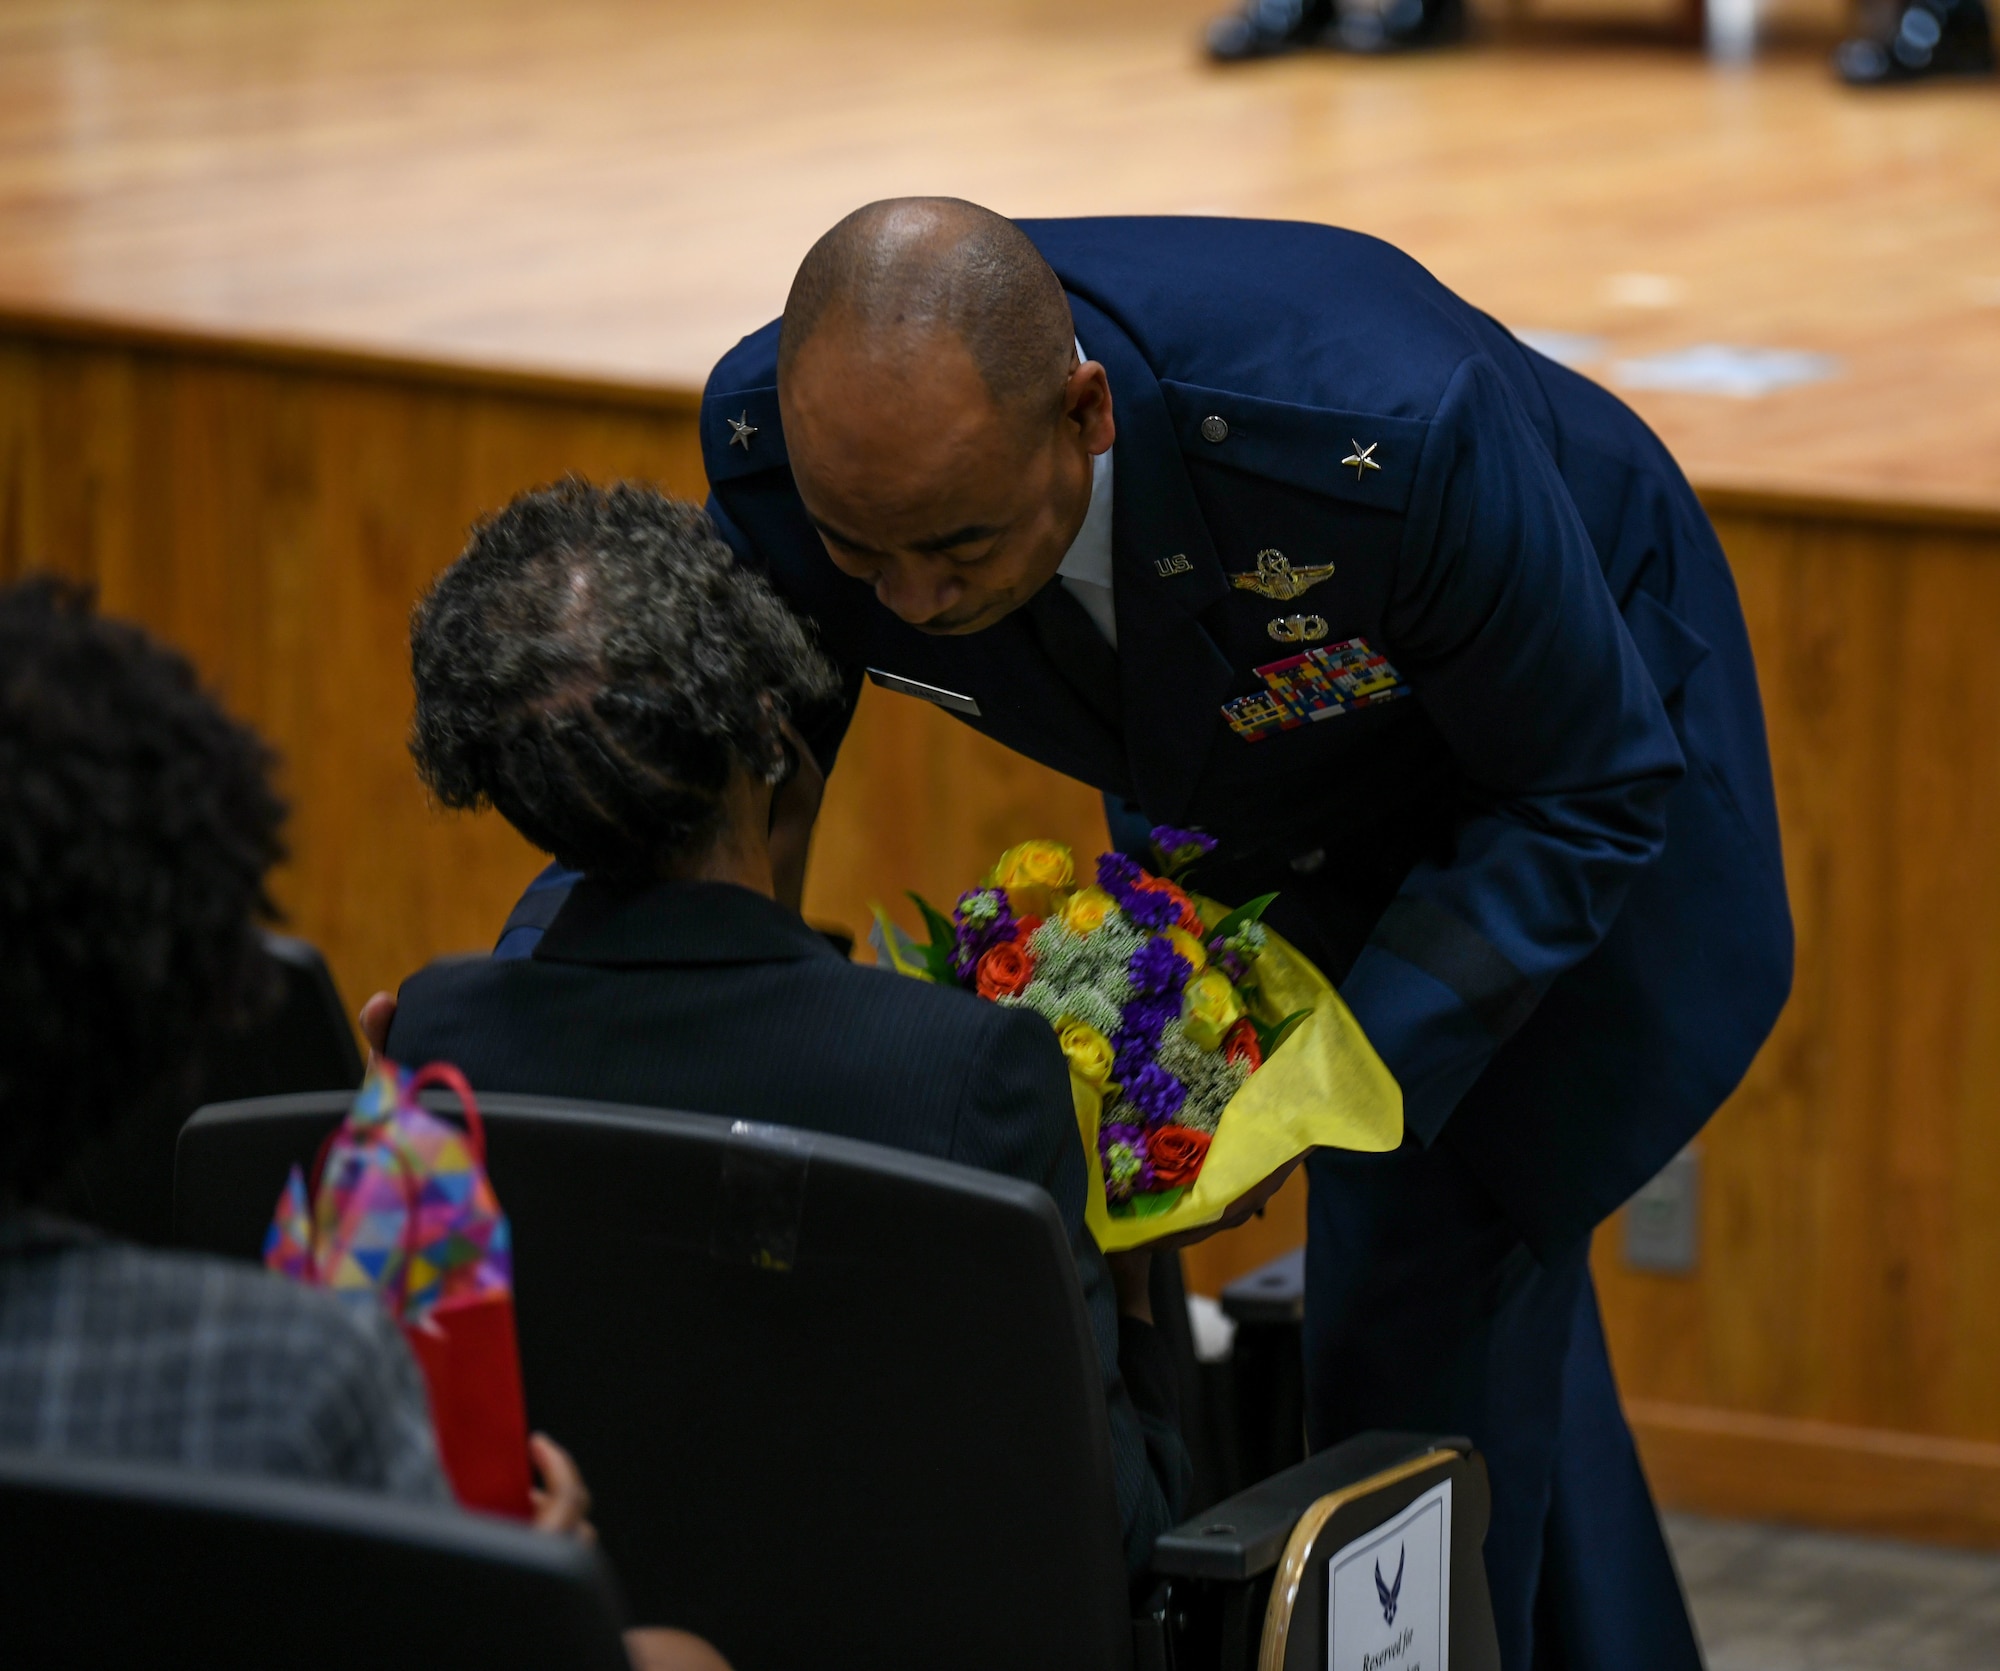 Brig. Gen. Edward H. Evans, Jr., chief of staff, Mississippi Air National Guard, and the first Mississippi Air National Guard member to be promoted to the rank of brigadier general, presents his mother with a bouquet during his promotion ceremony at Mississippi National Guard Joint Force Headquarters, Jackson, Mississippi, March 5, 2022.